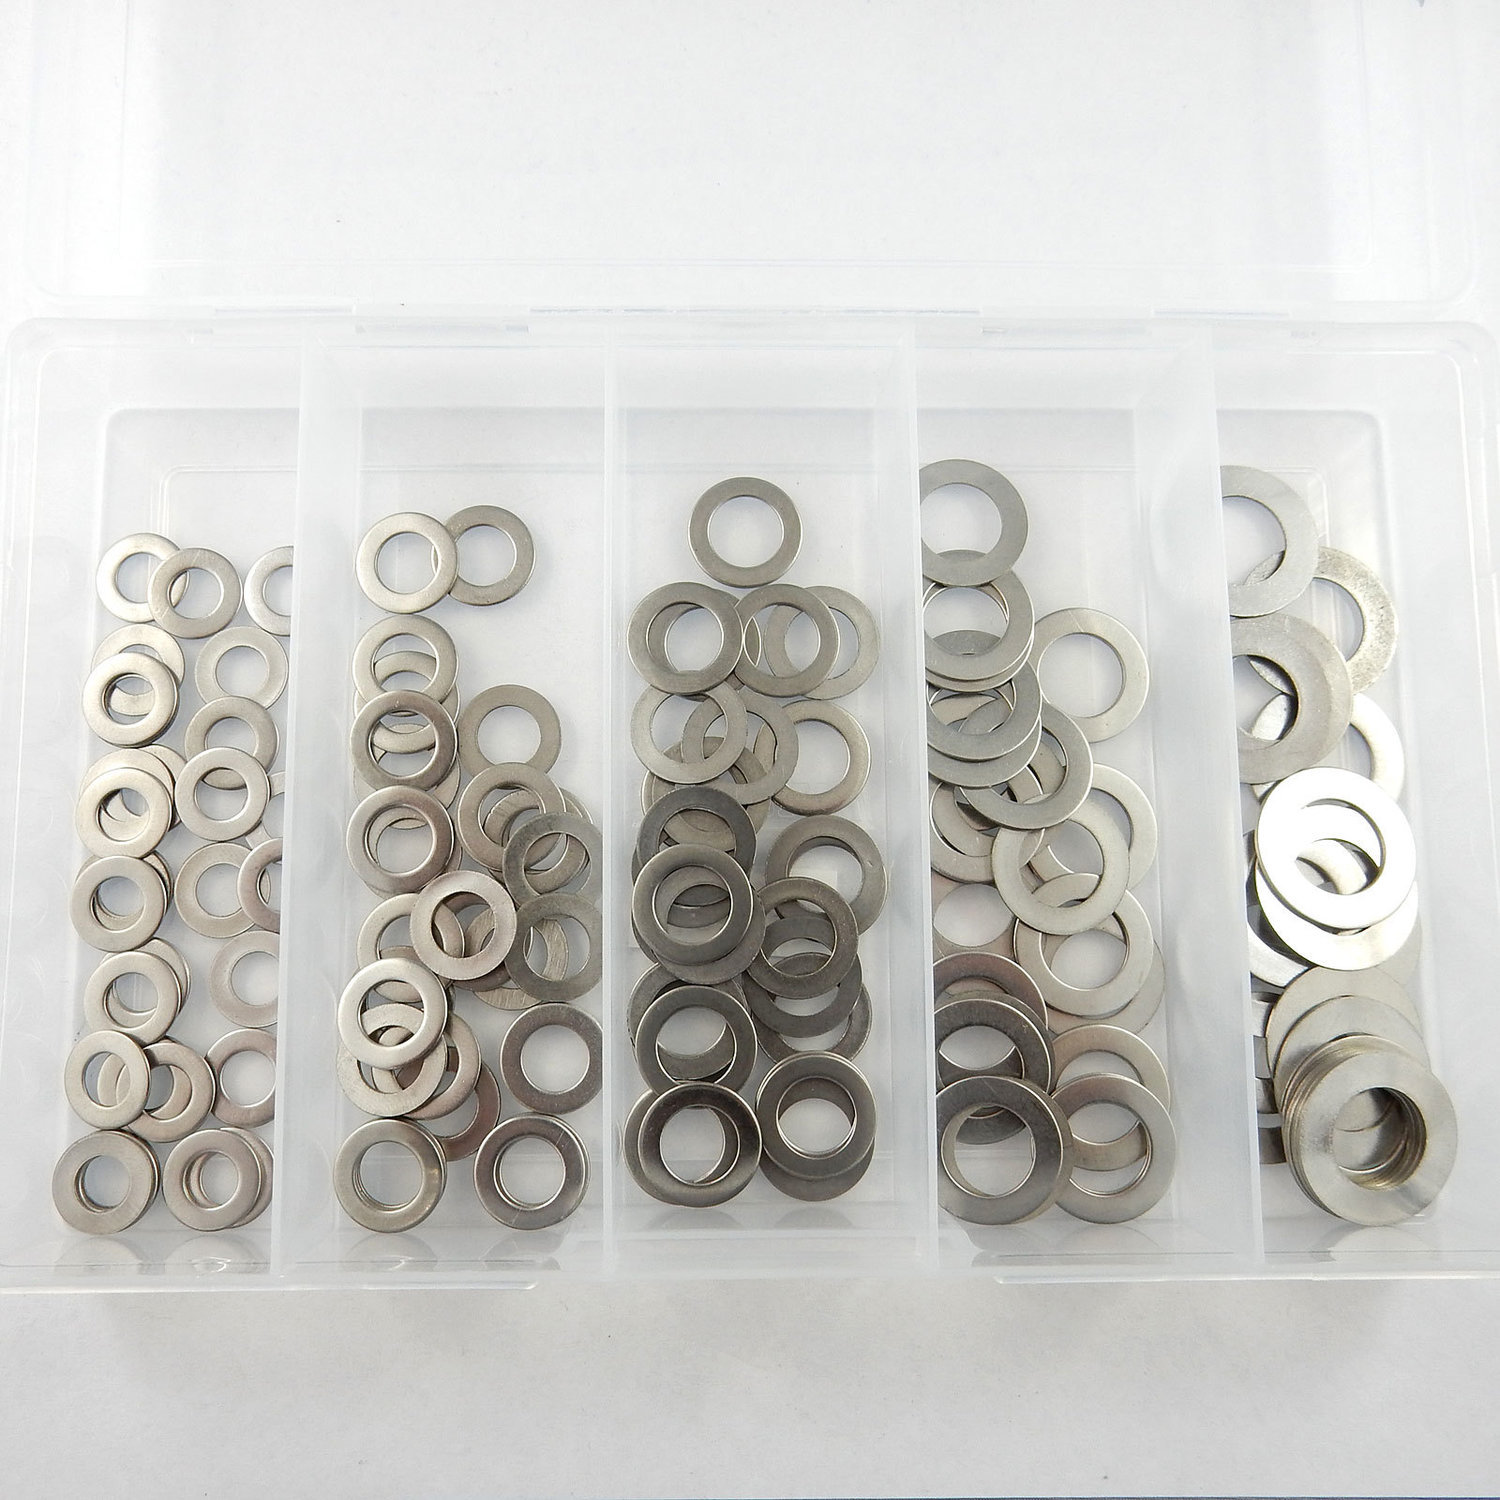 145 Piece Thin Stainless Steel Flat AN Washer Kit